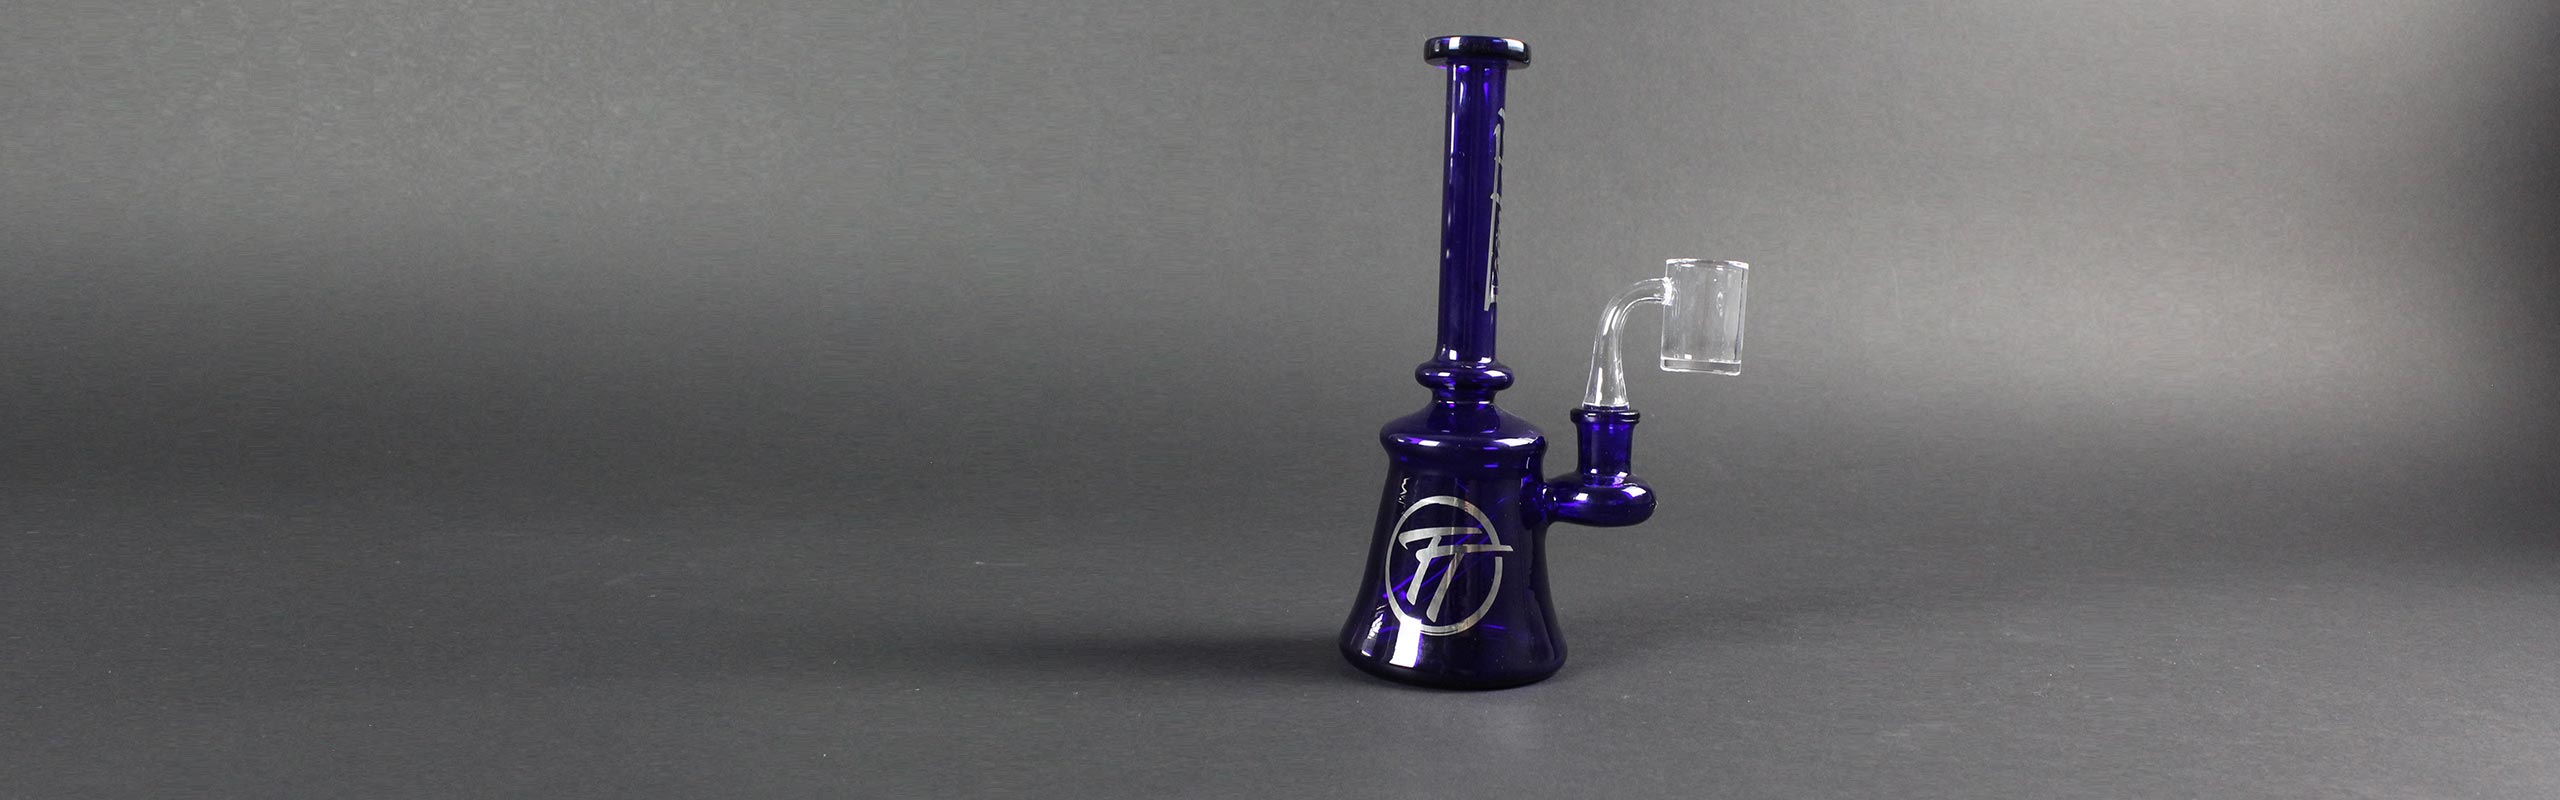 Beginner's Guide to Dab Rigs